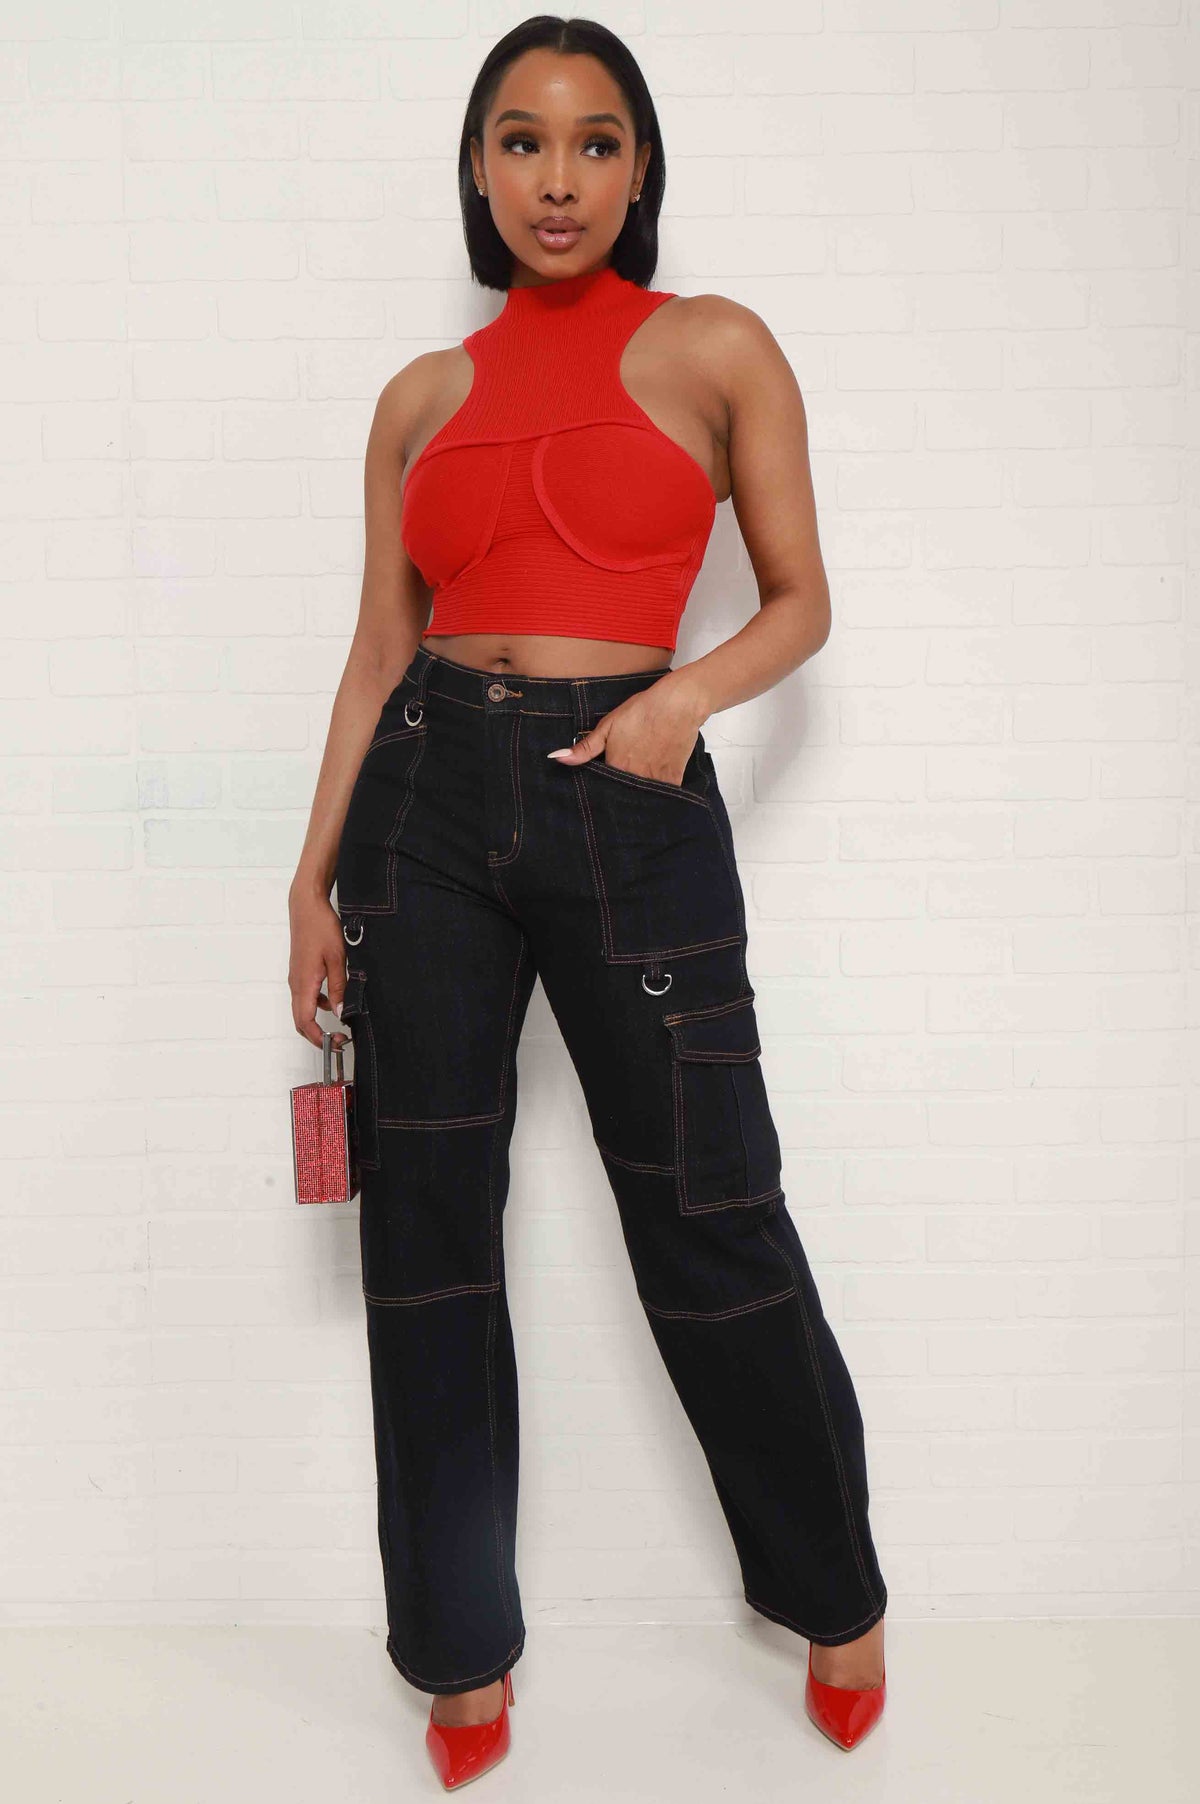 
              Off The Hook Sleeveless Knit Crop Top - Red - Swank A Posh
            